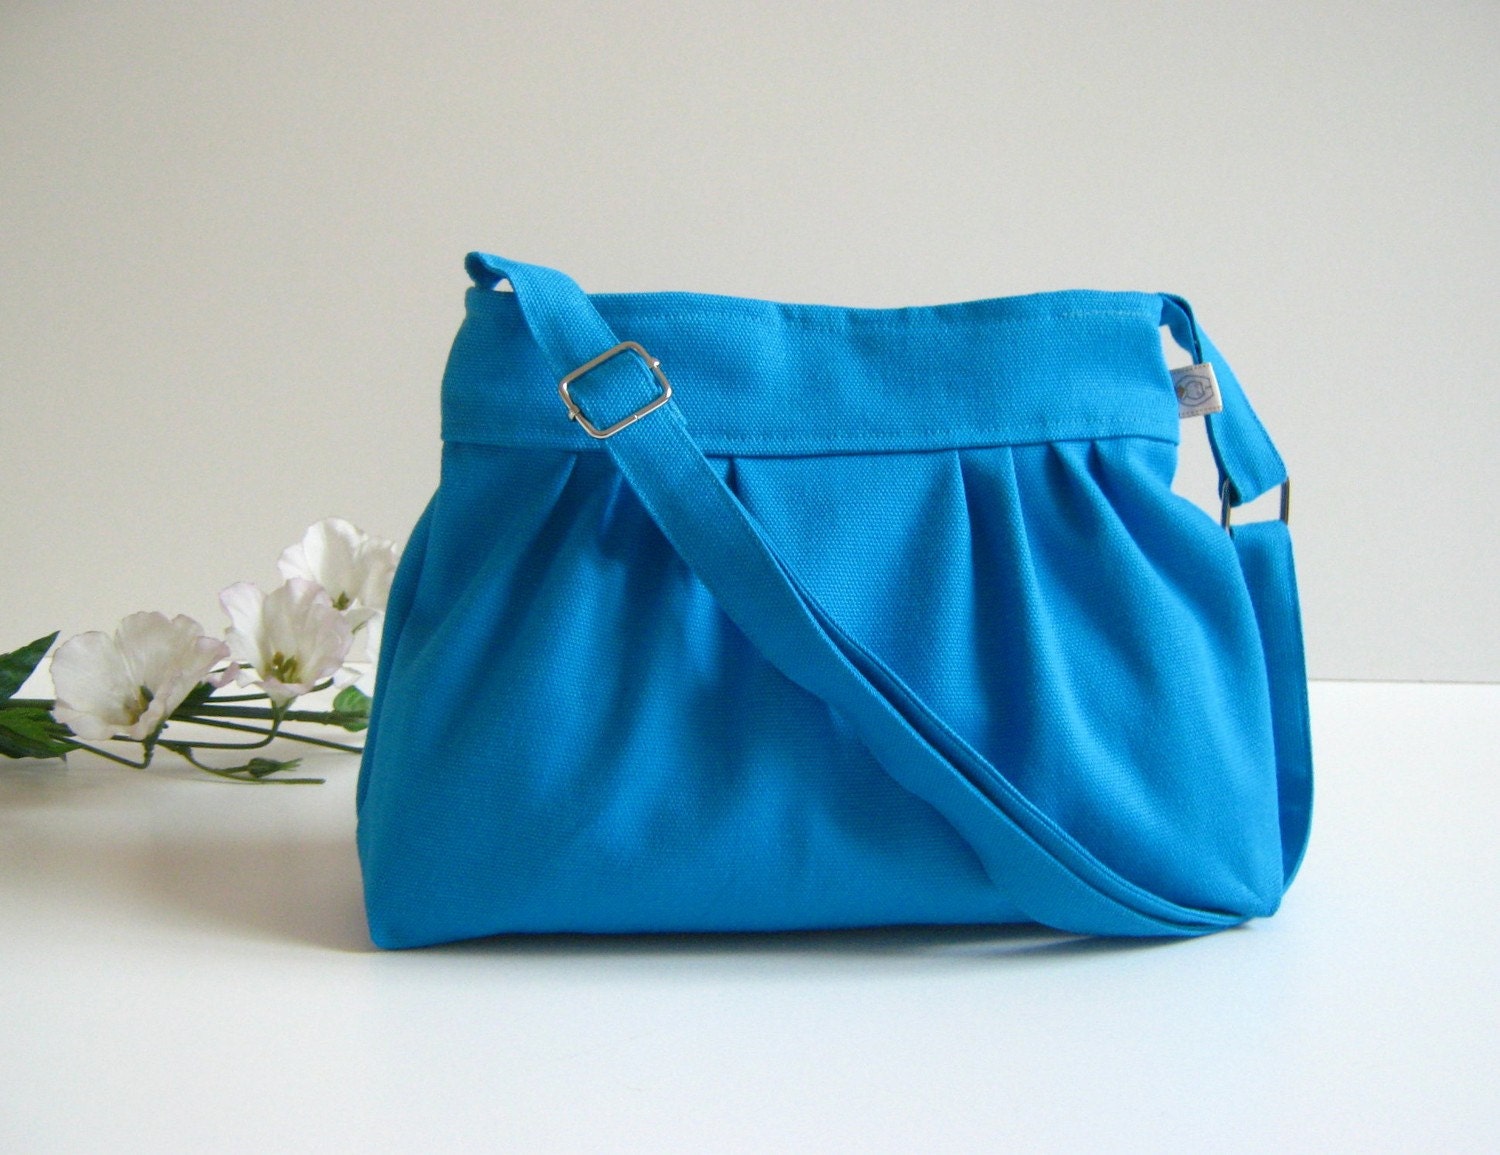 Pleated Bag in True Blue Small adjustable strap and top